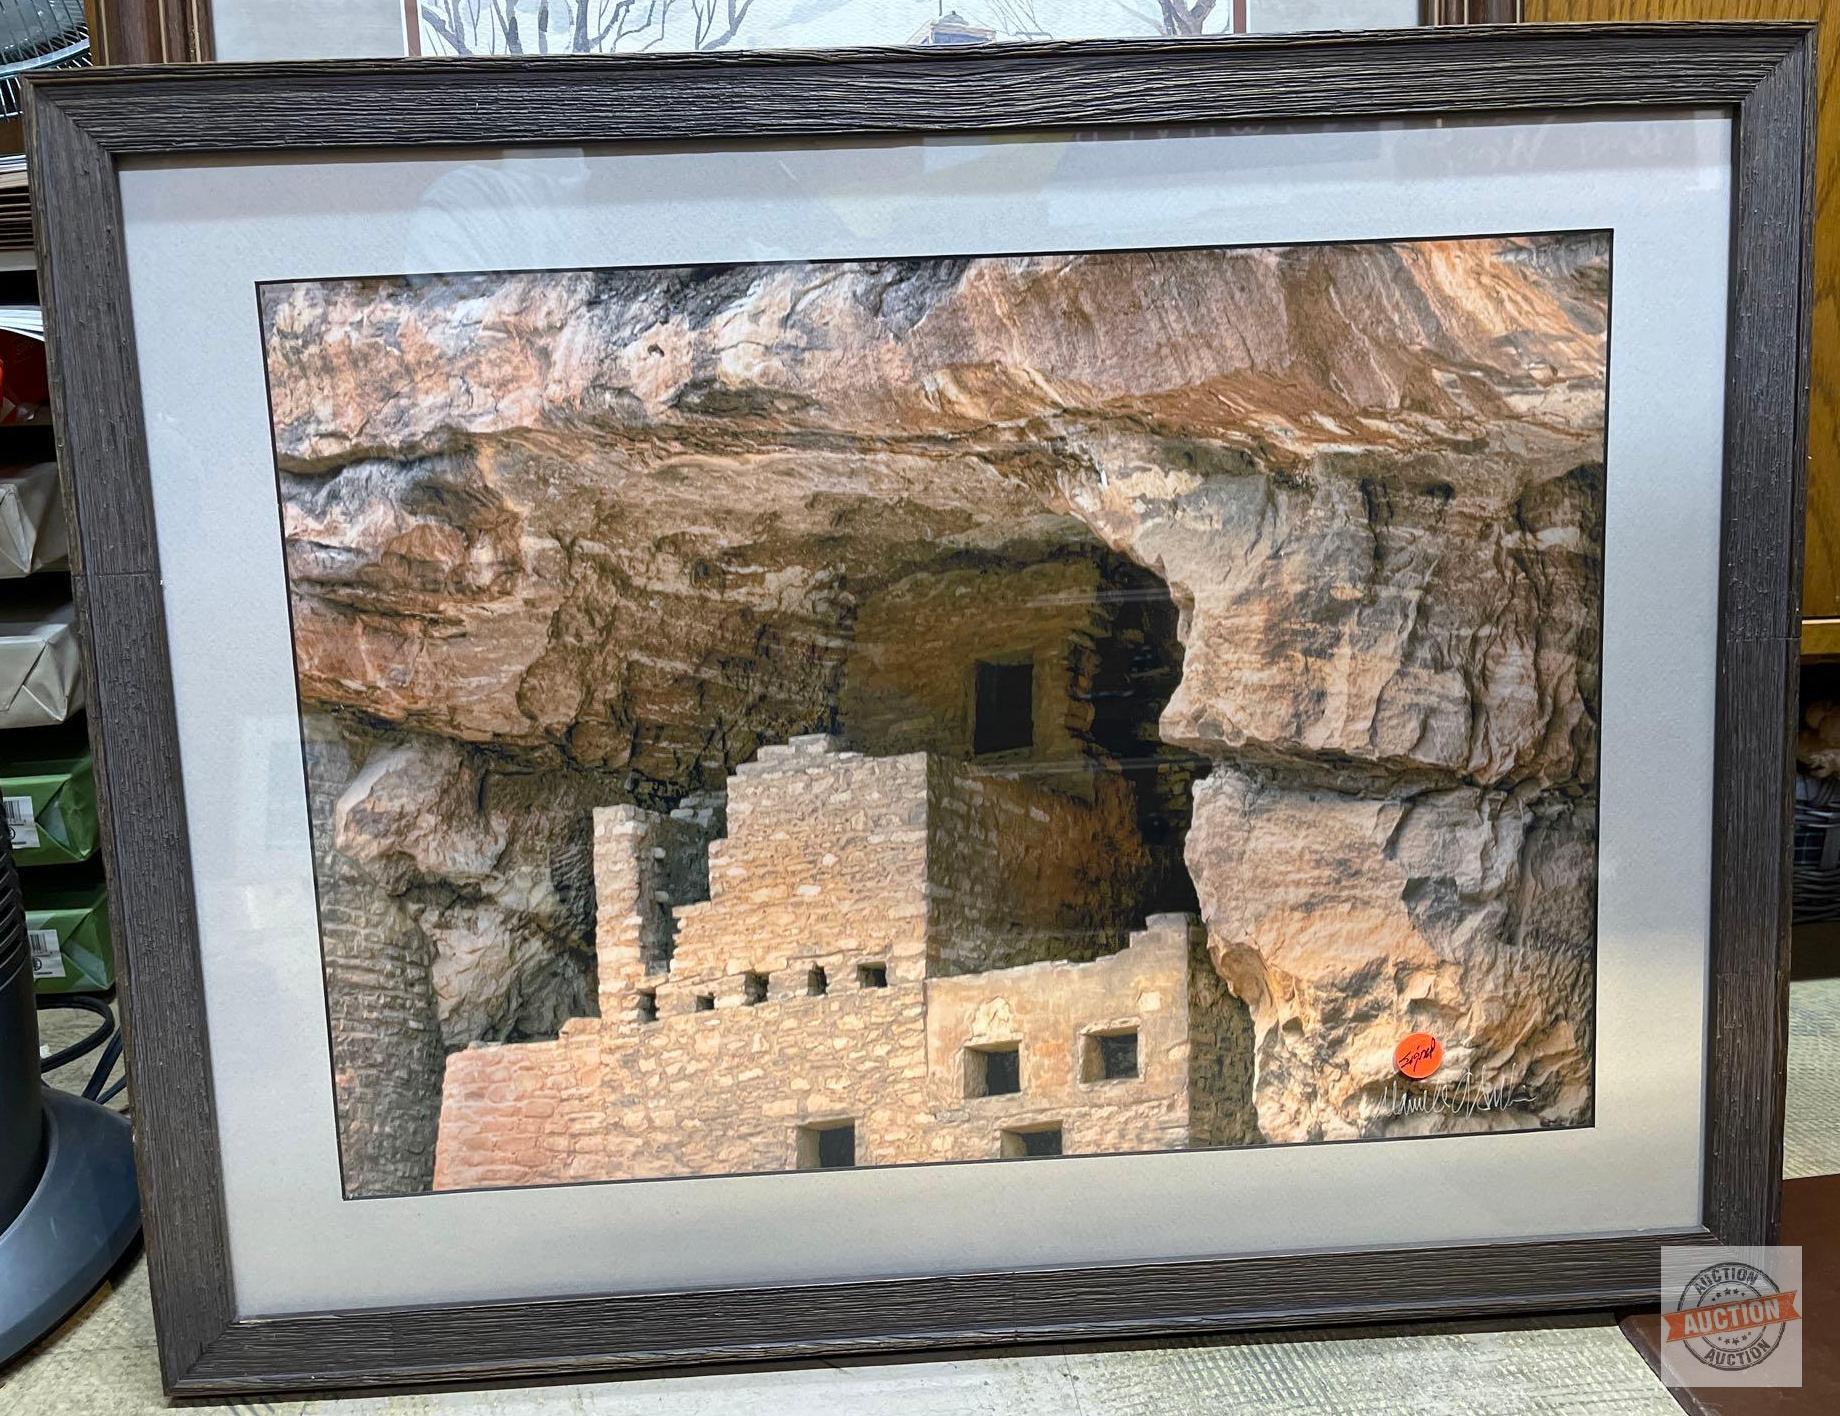 Artwork - Print, Mountain Cliff Dwelling of the American southwest